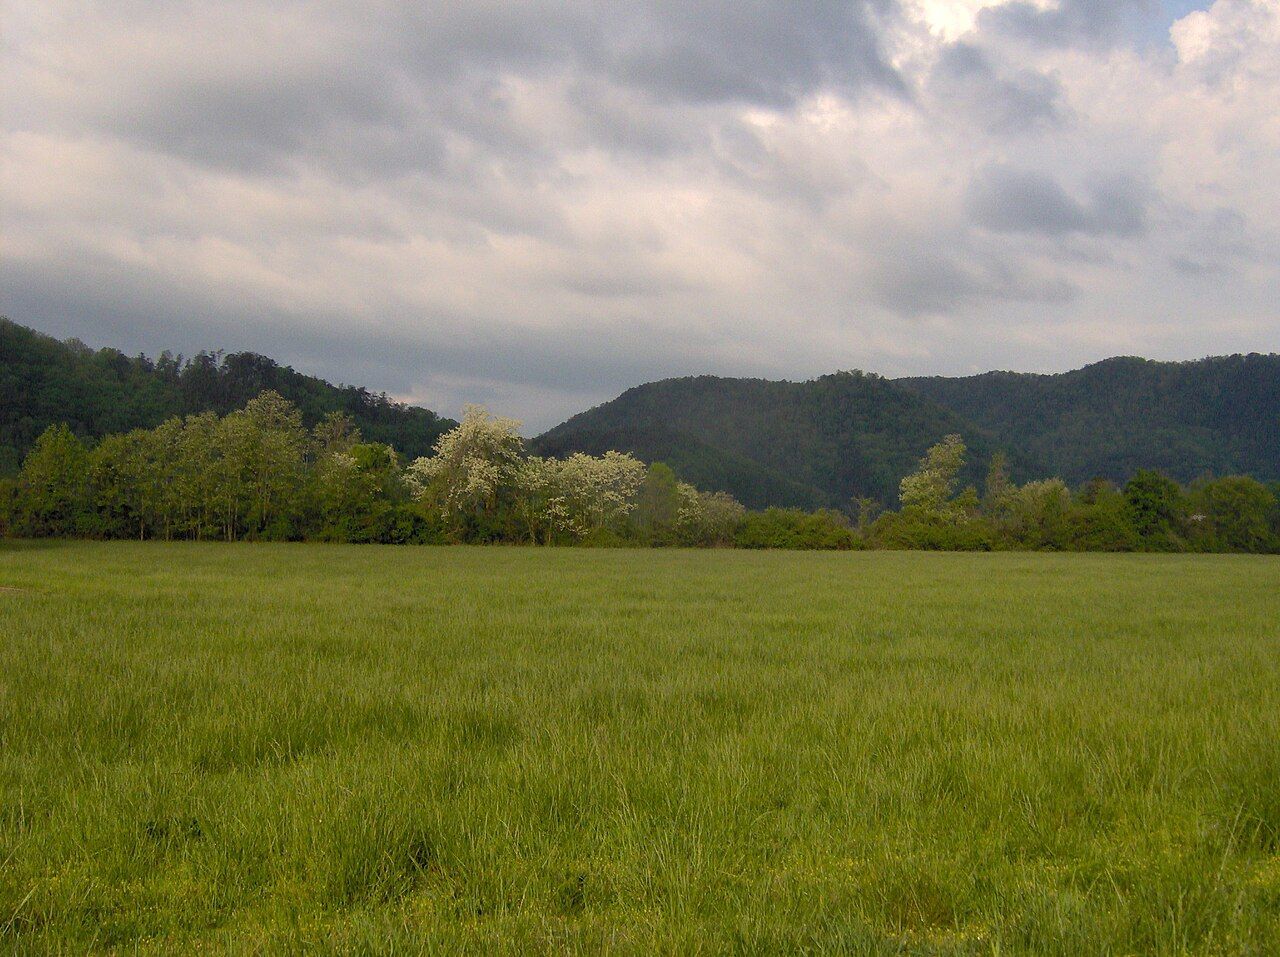 Looking toward the site of the ancient Cherokee village of Tallassee in Blount County, Tennessee